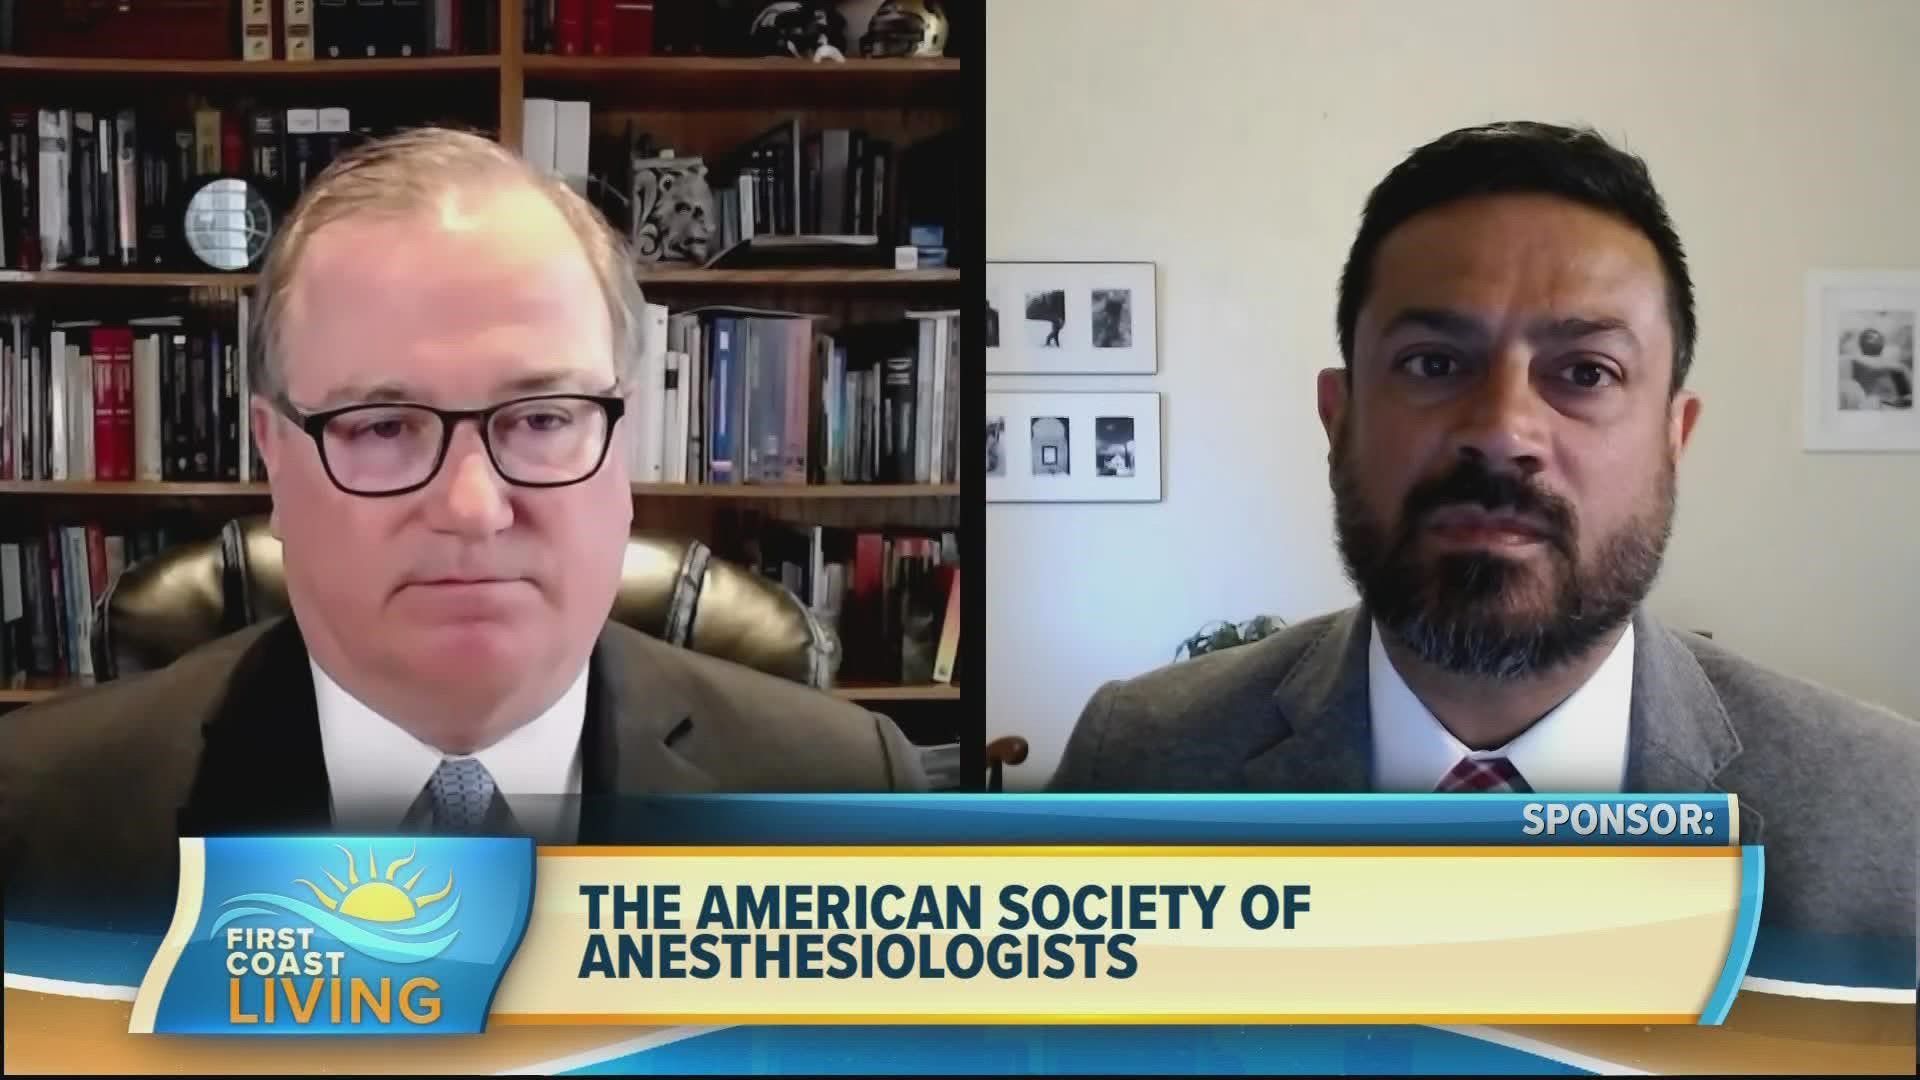 The American Society of Anesthesiologists is asking Americans to help protect our Veterans. Learn how you can get involved.